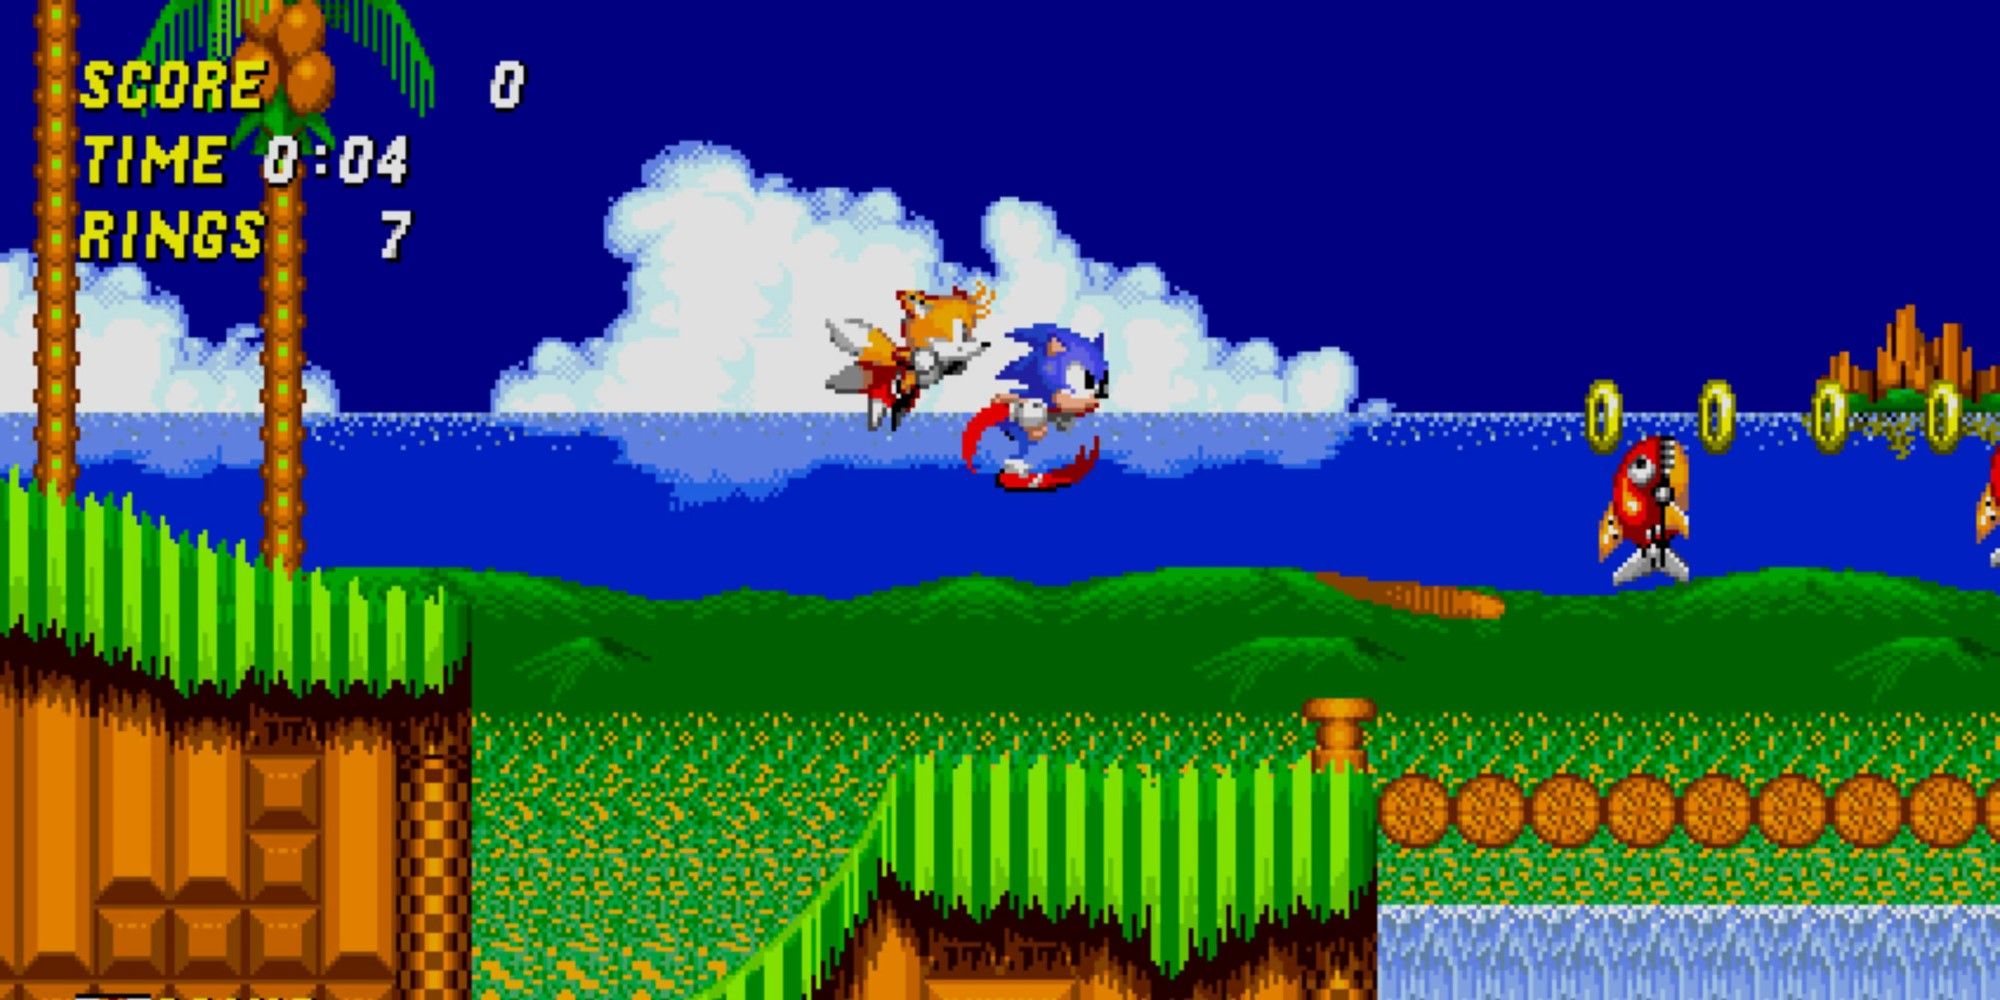 Sonic and Tails going through emerald hill zone from Sonic 2.